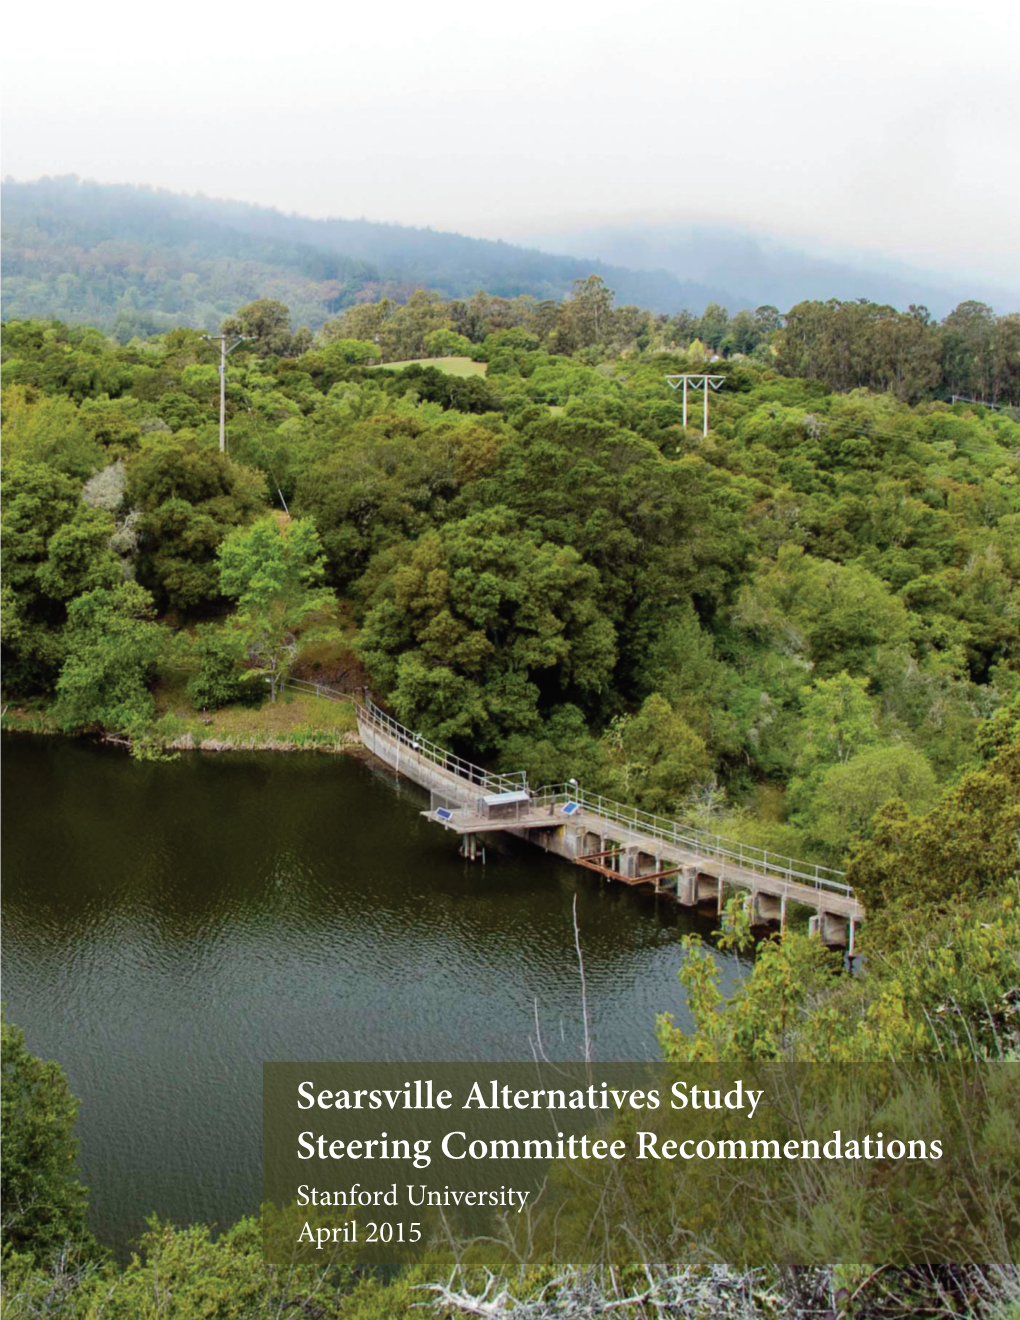 Searsville Alternatives Study Steering Committee Recommendations Stanford University April 2015 Cover Photo Credit: Philippe S